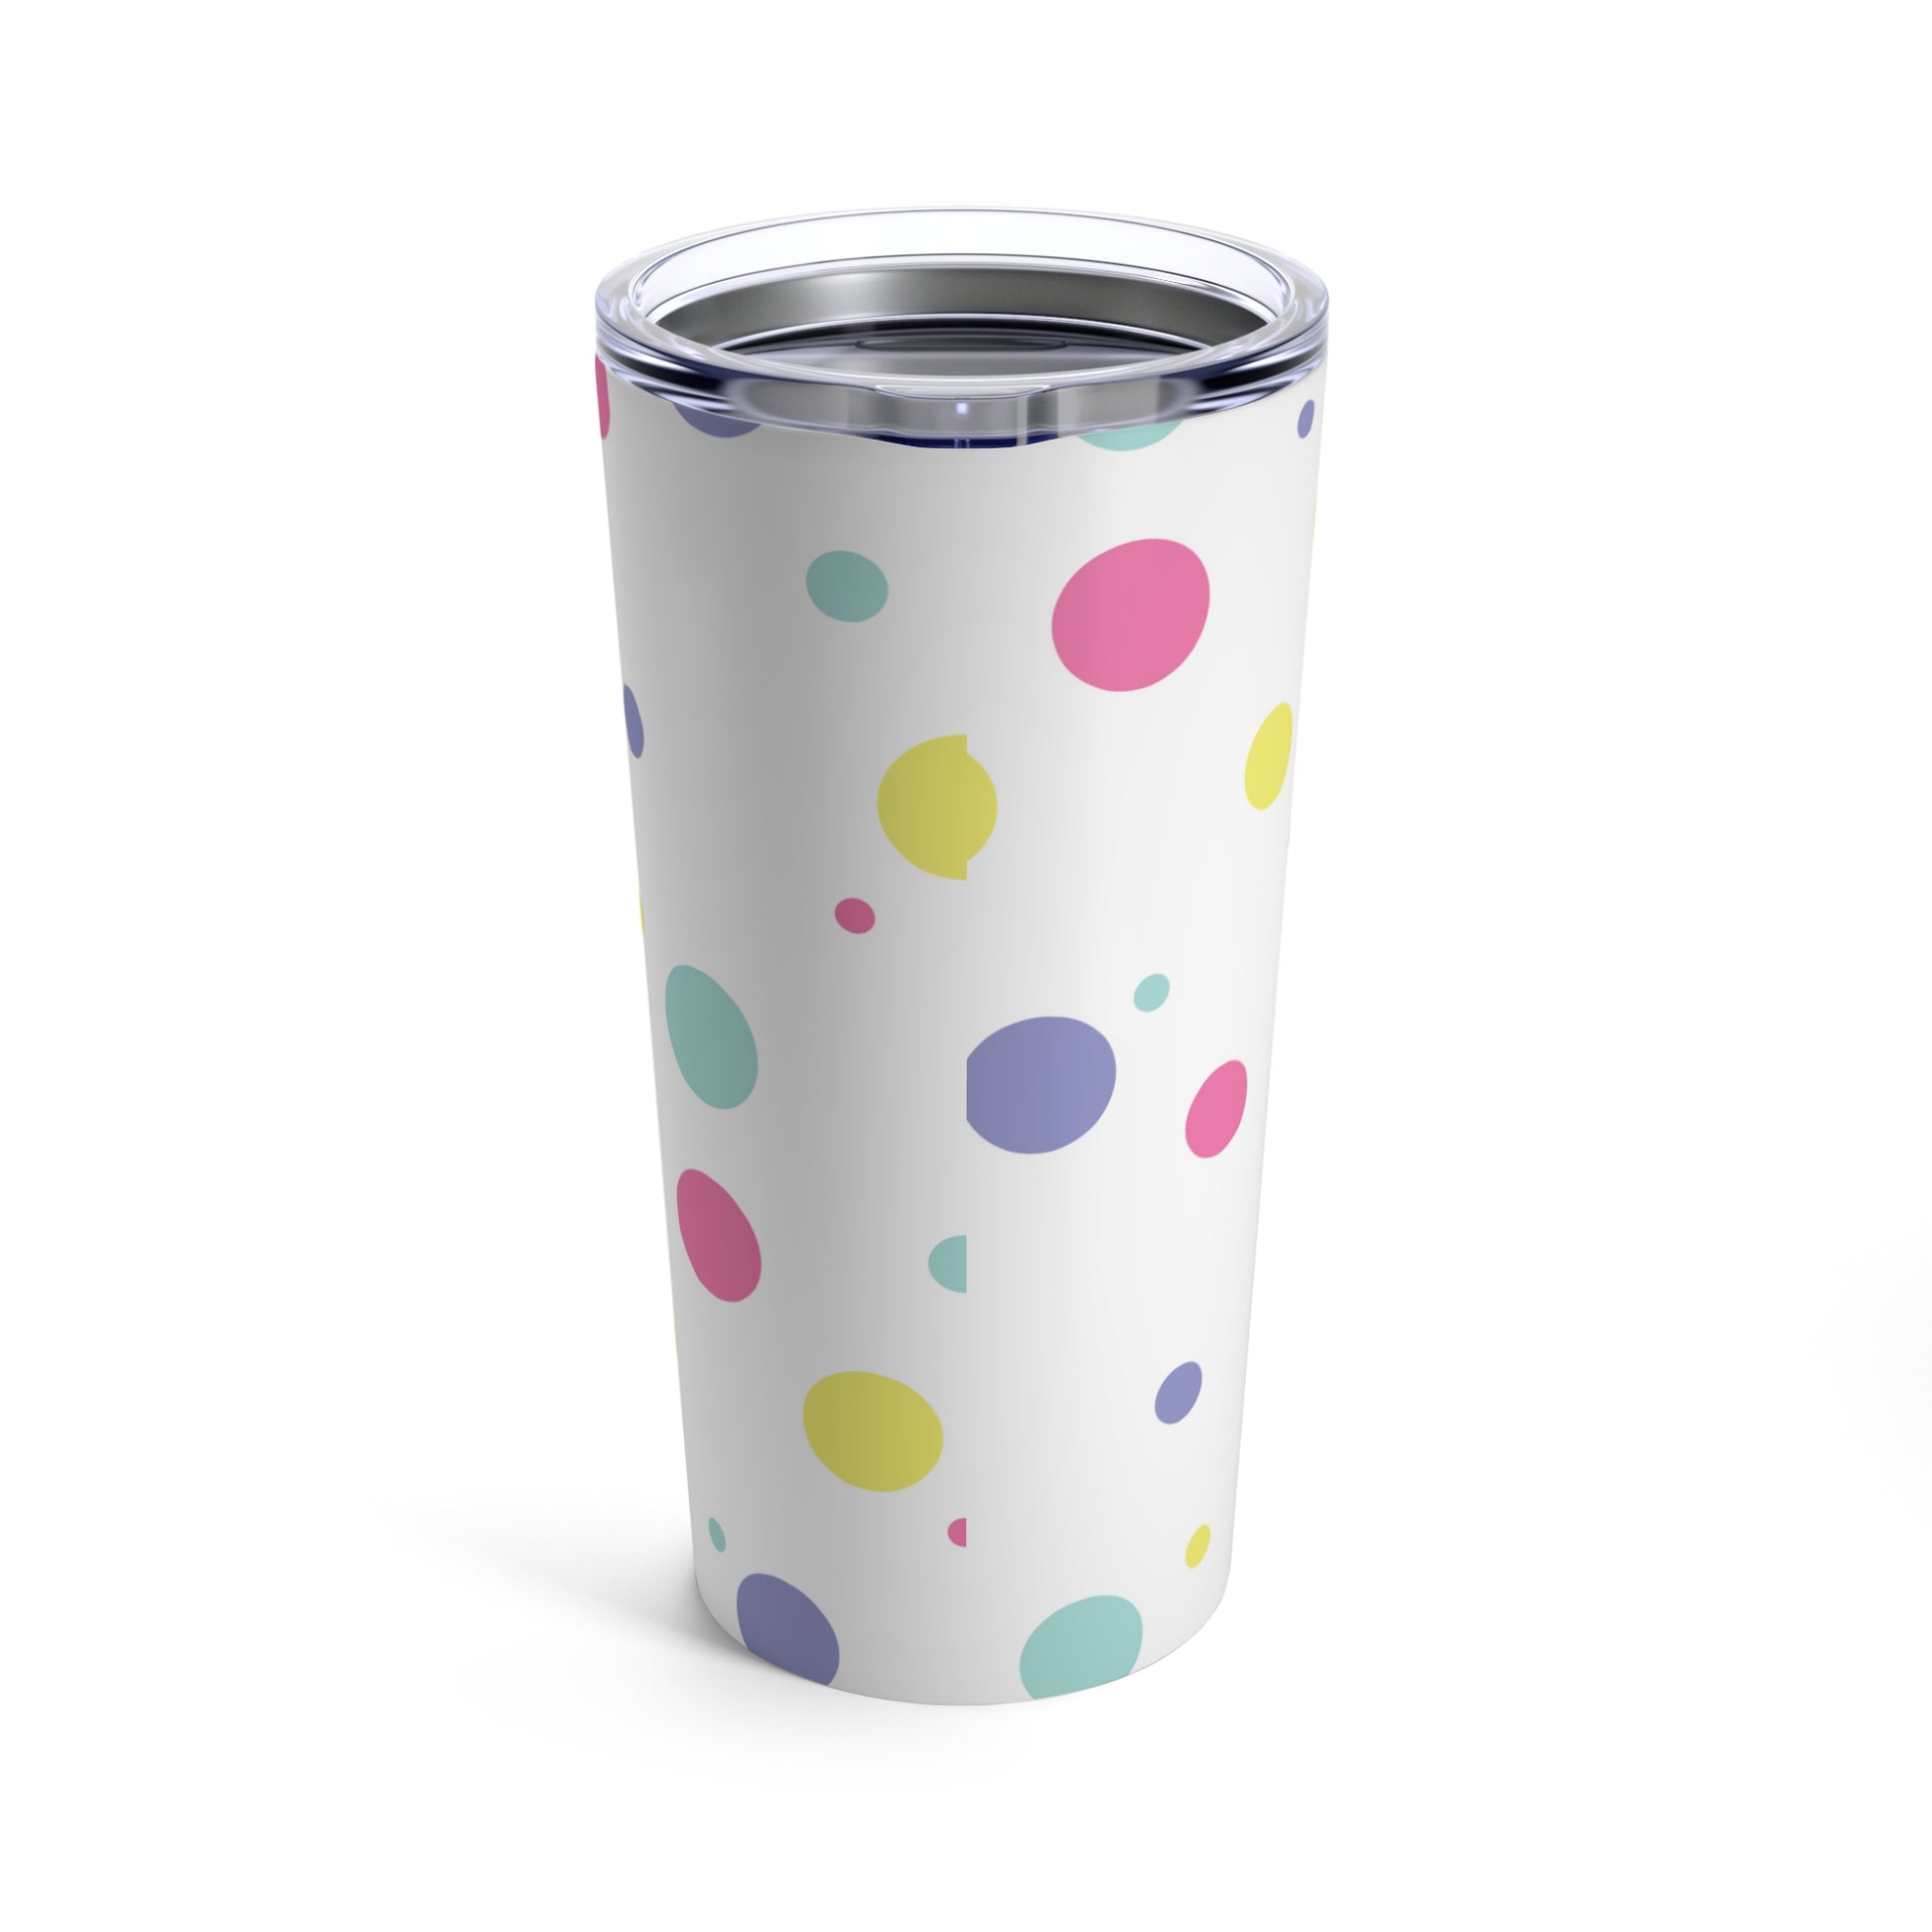 A dishwasher safe, white stainless steel Confetti Dots Tumbler with colorful polka dots on it. (Printify)